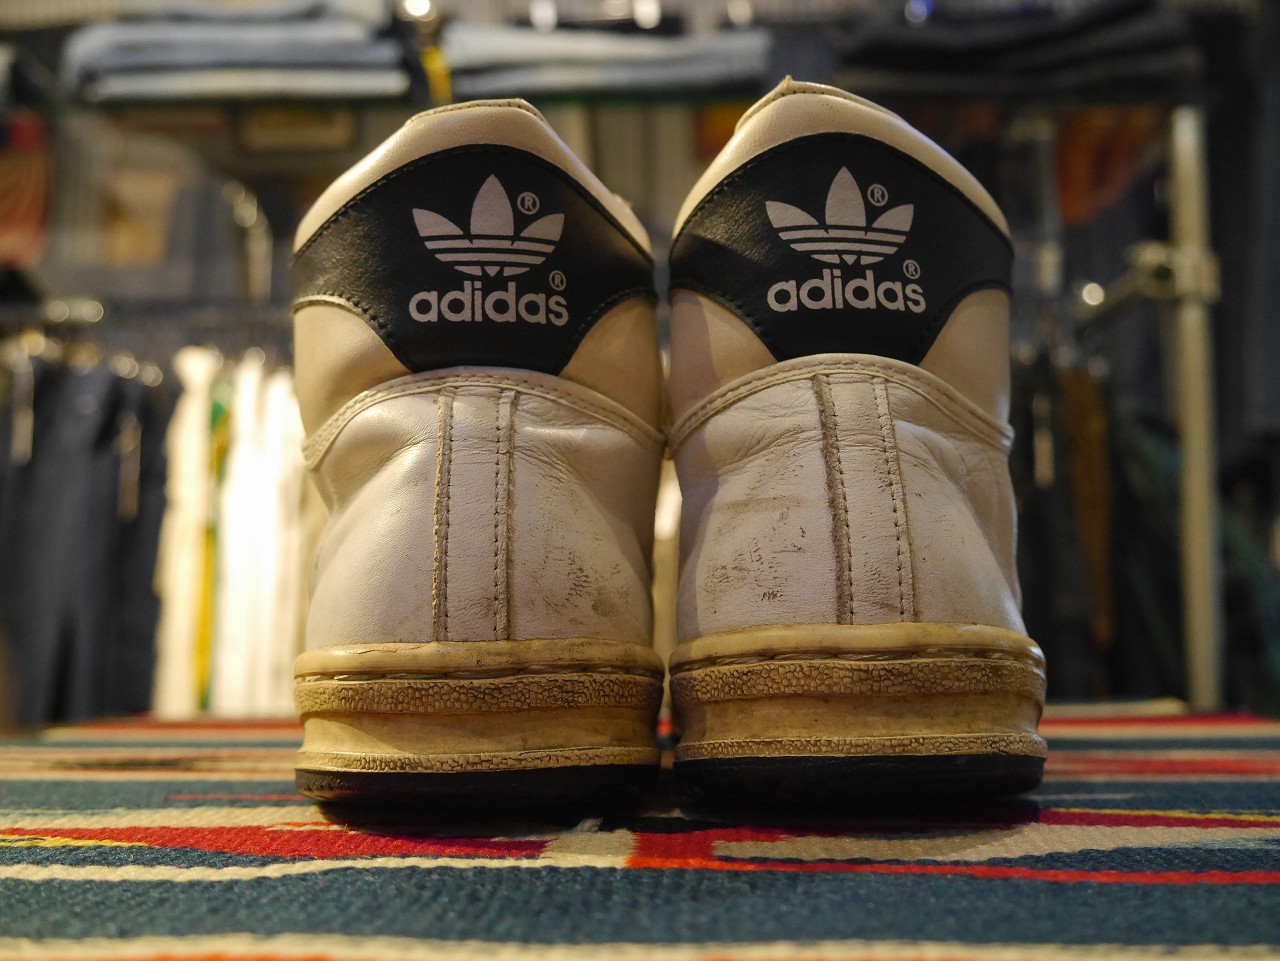 1980's " adidas " UNKNOWN BASKETBALL SHOES!! : BAYSON BLOG